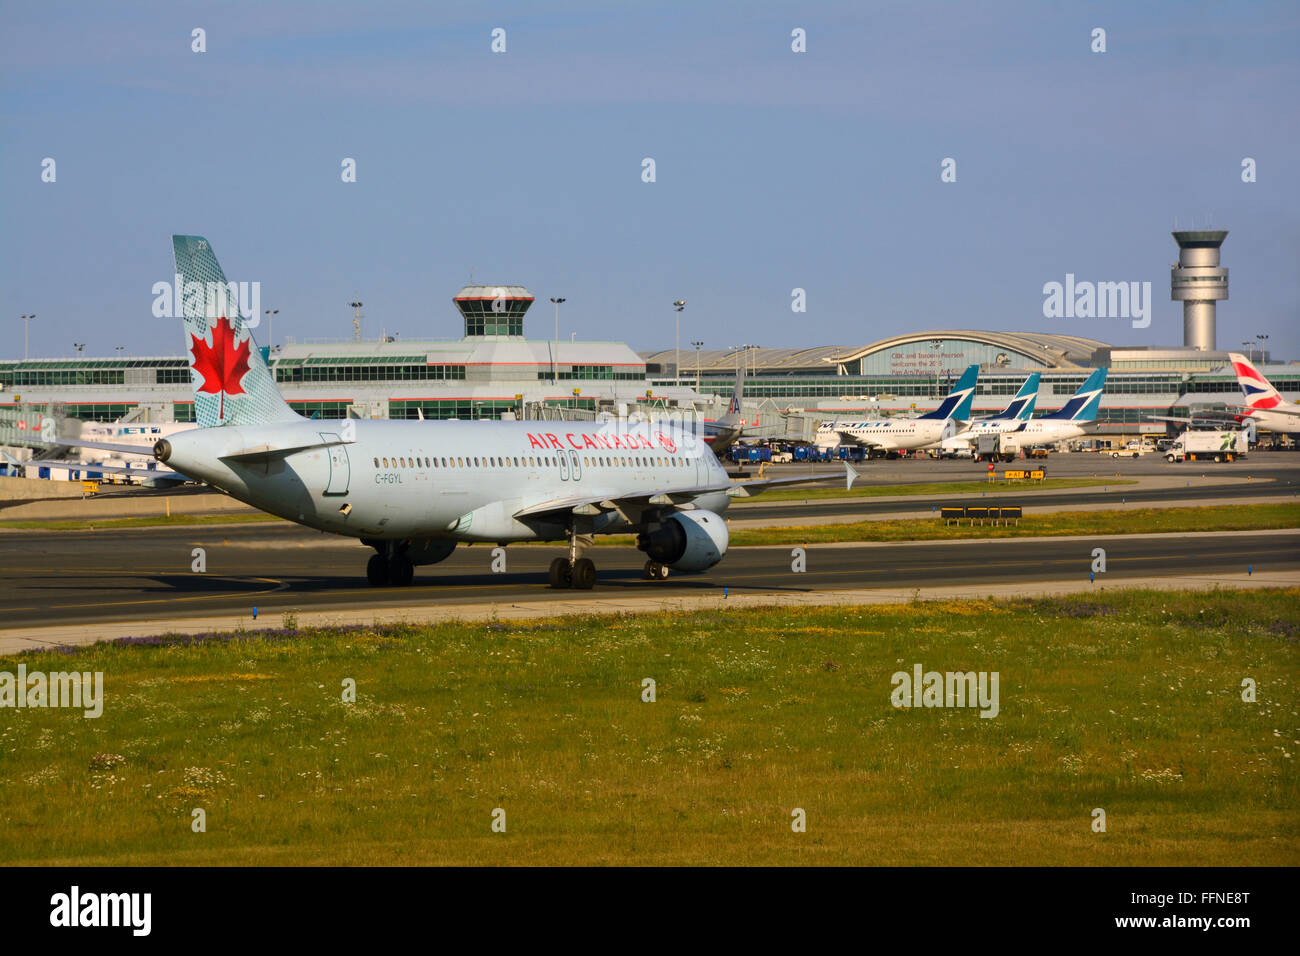 Air Canada airplane at Pearson airport, Toronto, Canada Stock Photo Alamy